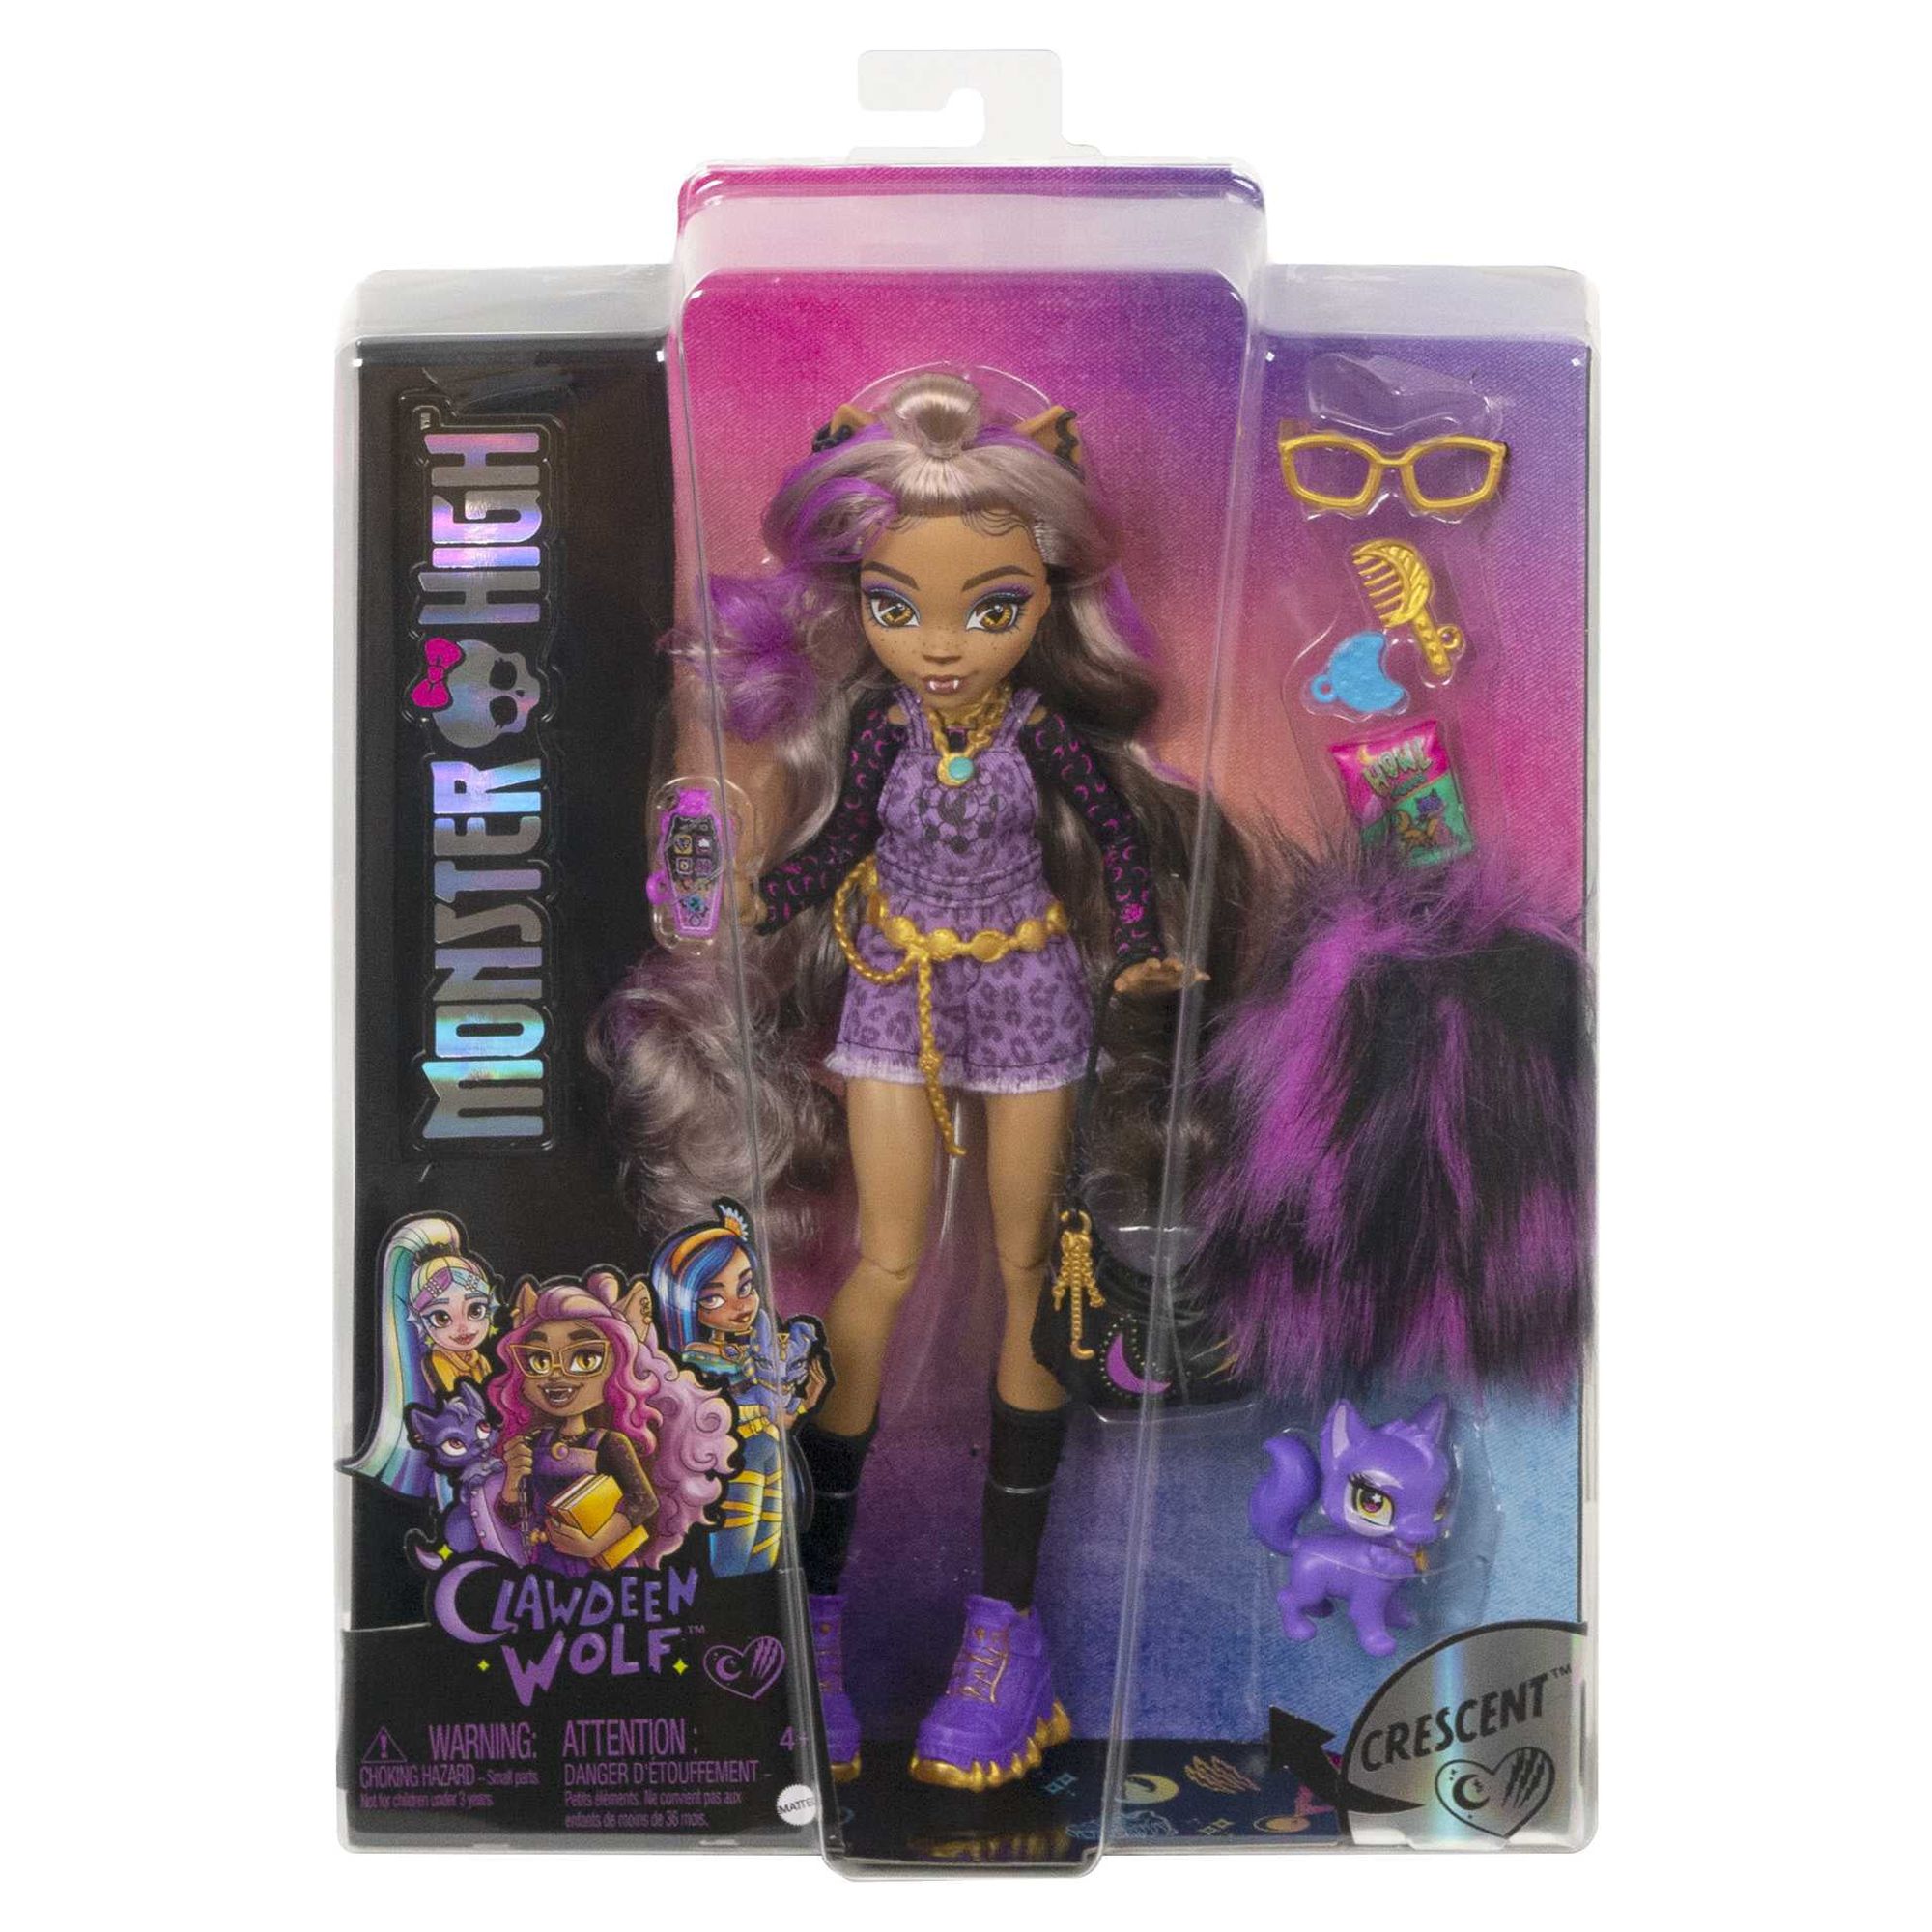 Monster High Clawdeen Wolf Fashion Doll with Purple Streaked Hair,  Accessories & Pet Dog